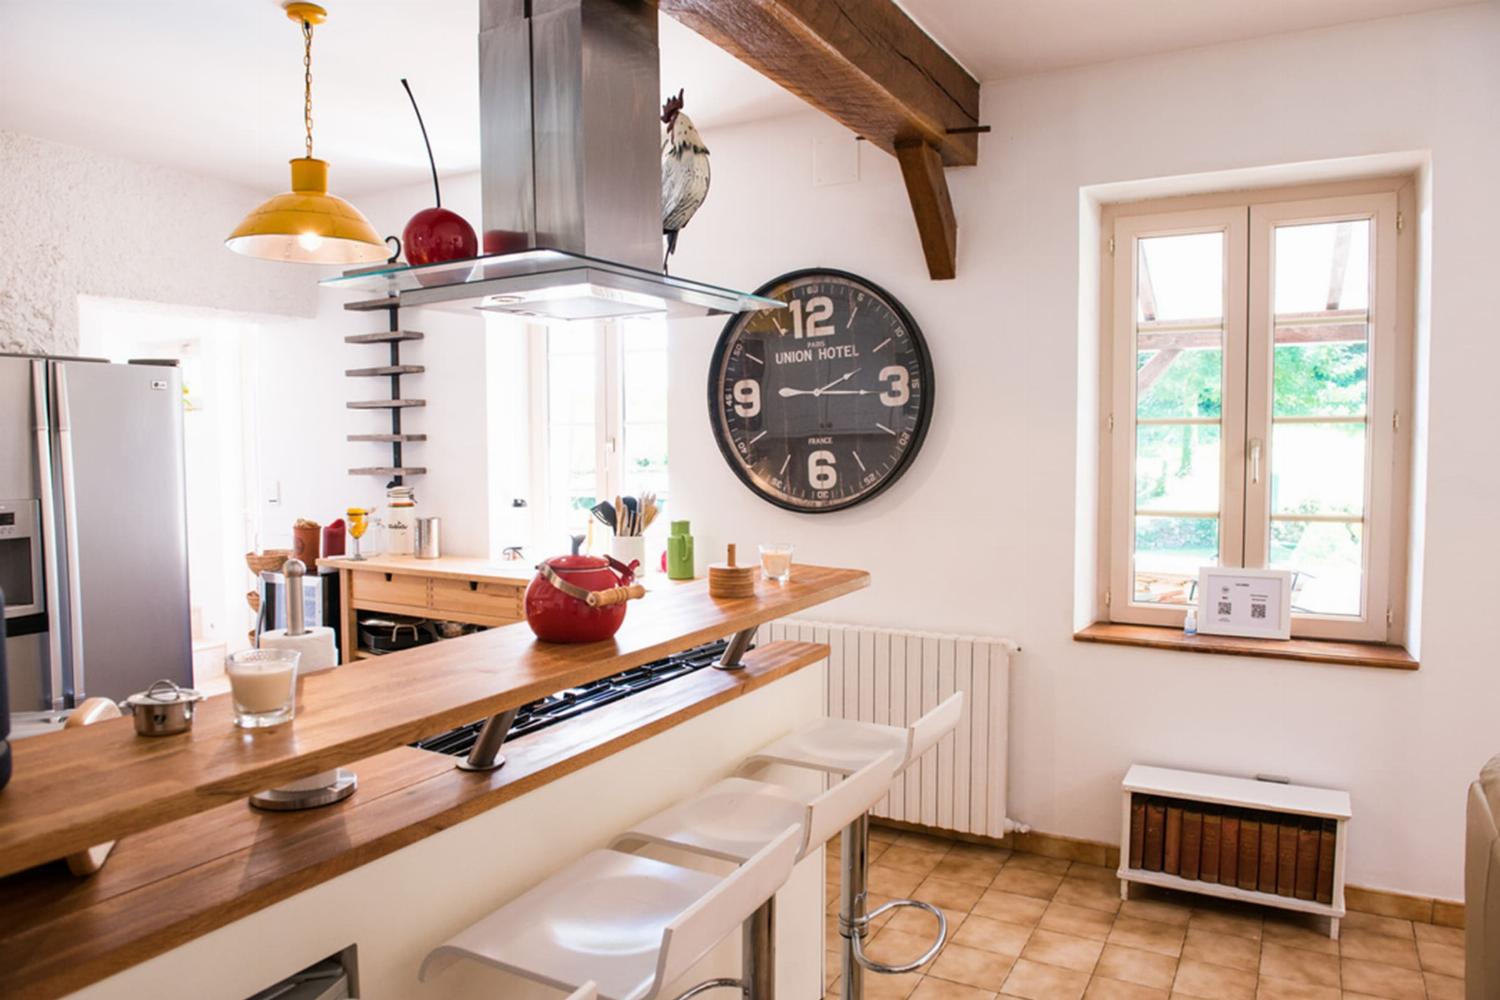 Kitchen | Holiday home in Lot-et-Garonne